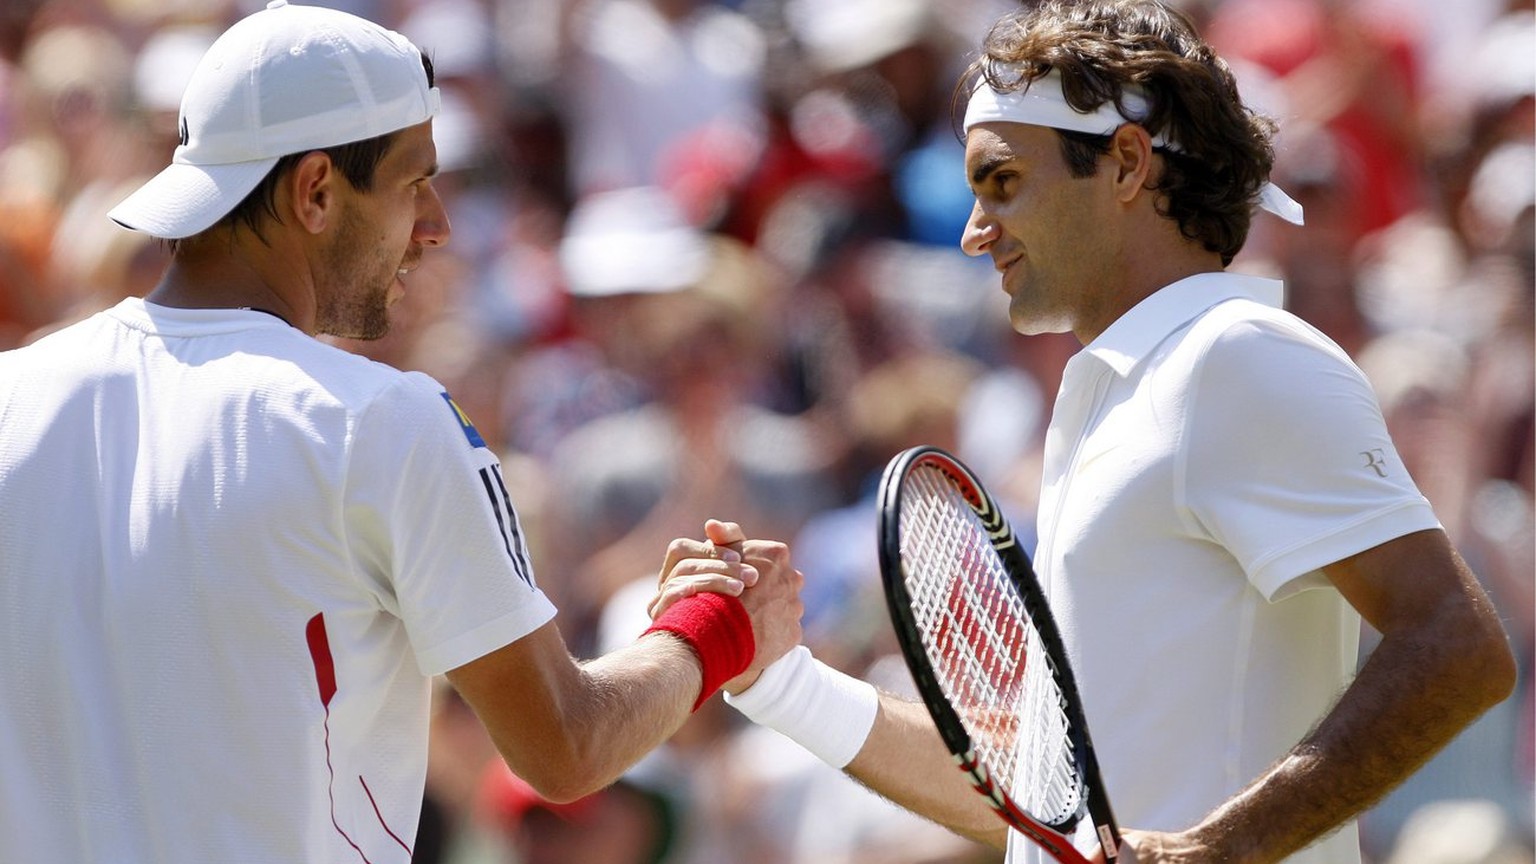 epa02227830 Roger Federer of Switzerland (R) at the net with Juergen Melzer of Austria whom he defeated in their fourth round match for the Wimbledon Championships at the All England Lawn Tennis Club, ...